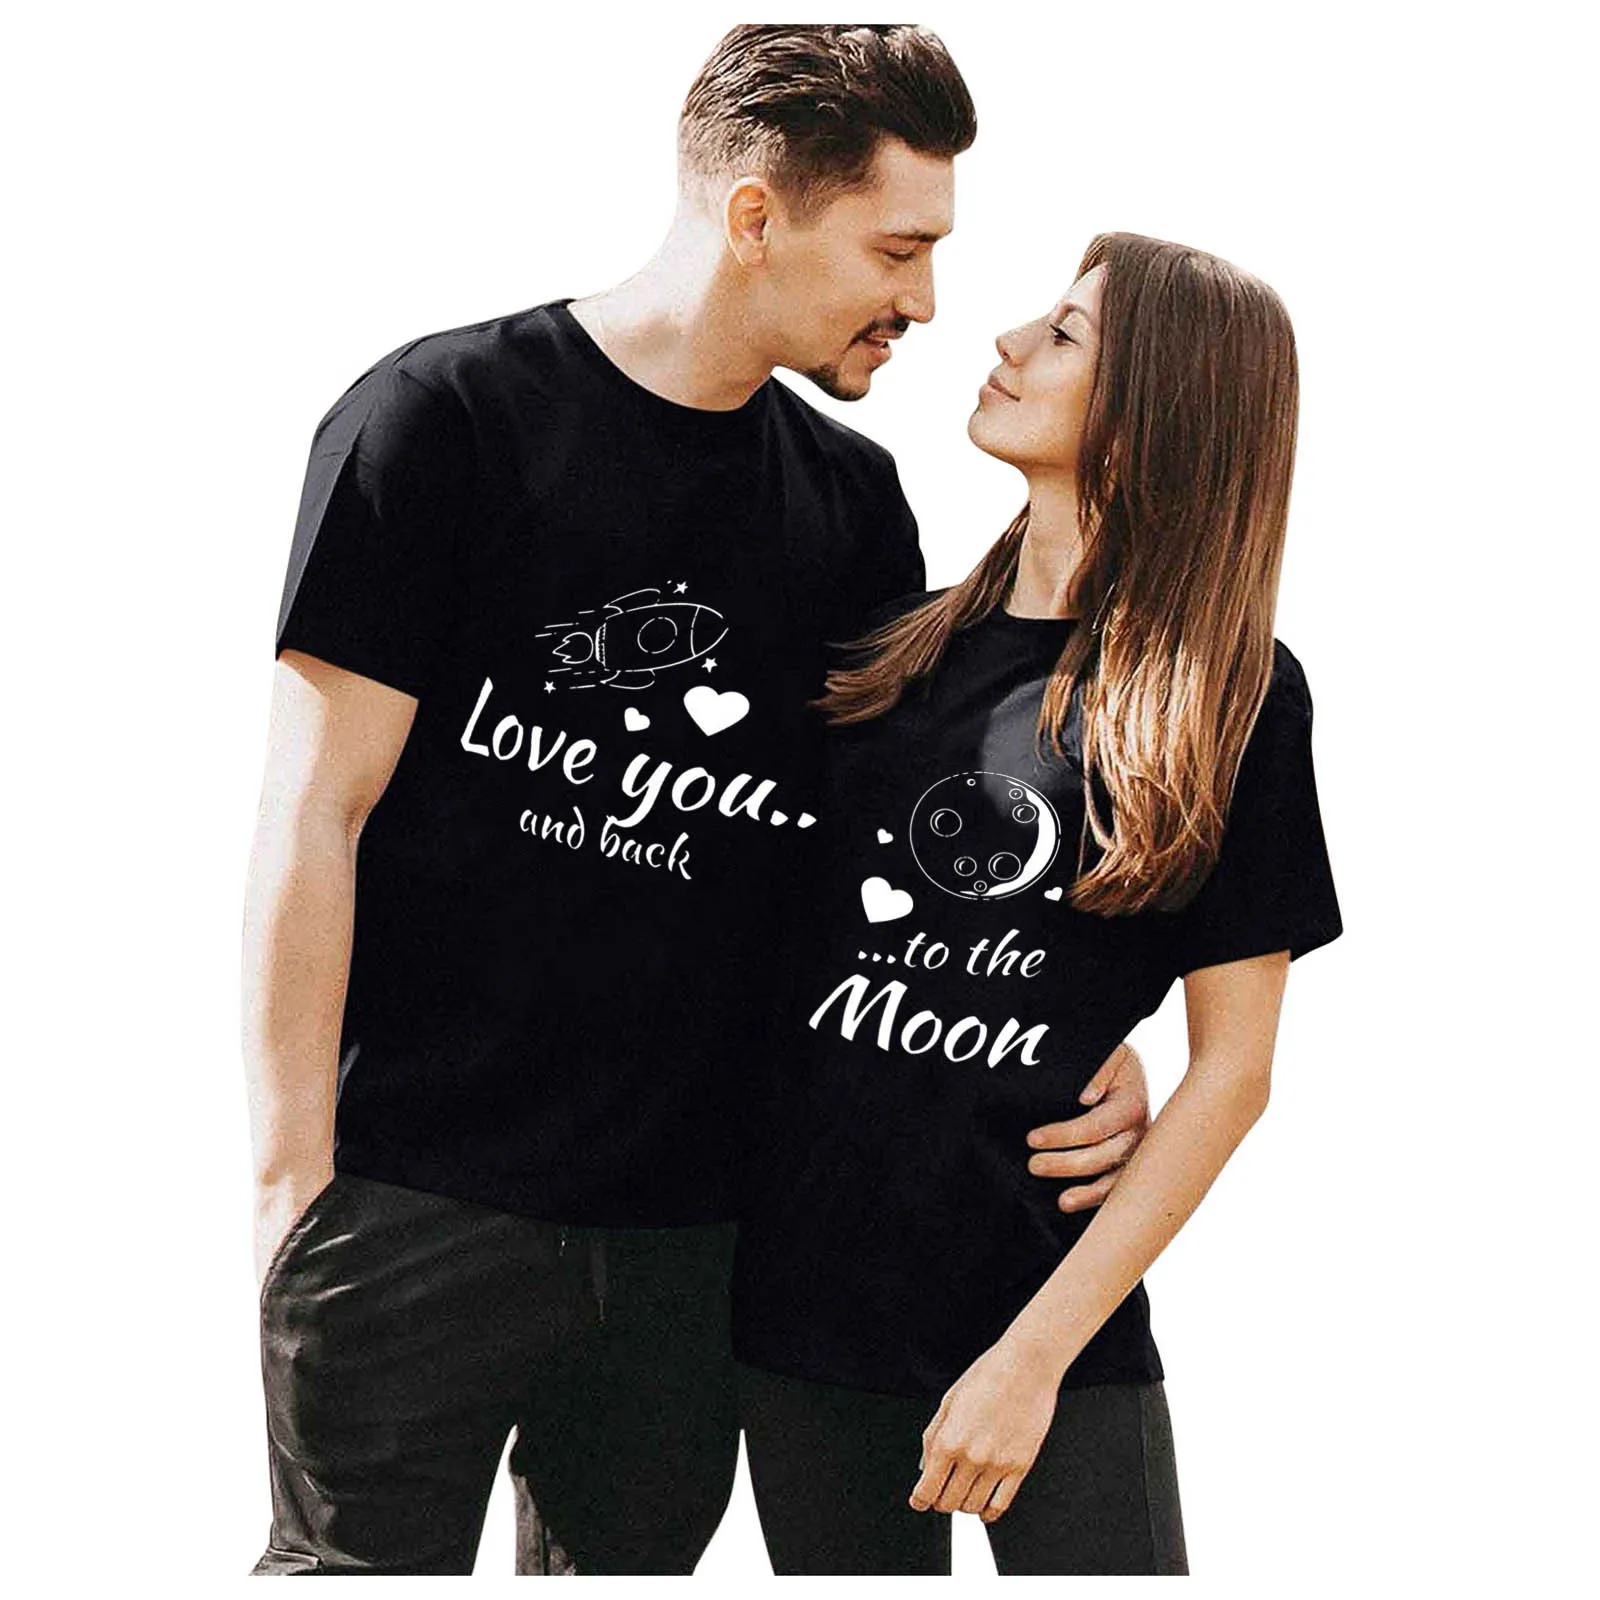 Fashion Matching Women T-Shirts Short Sleeves O Neck Love you Letter Print Casual Men's Tops T Shirt Valentine's Day Couple Top